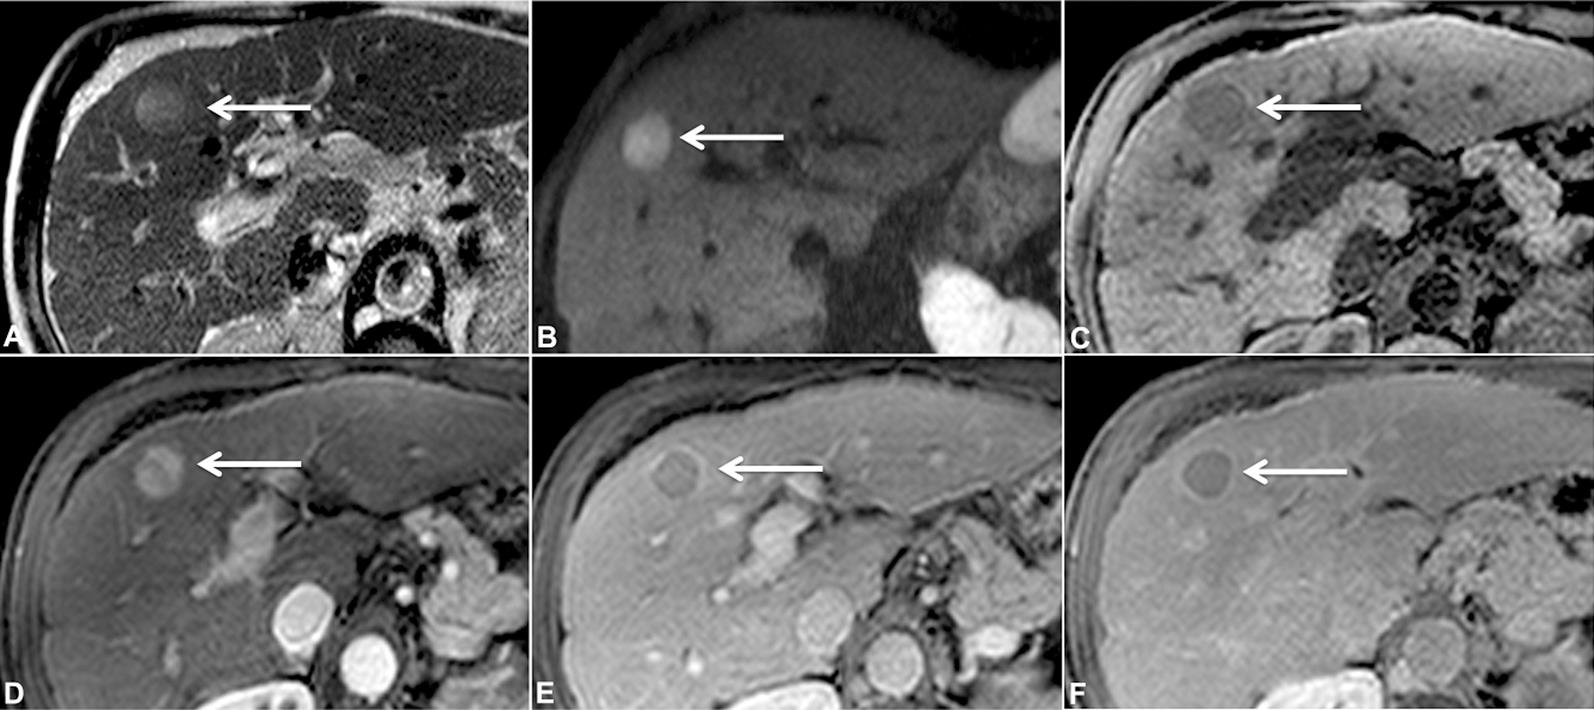 Multiphase, contrast-enhanced MRI in a 64 year-old man with cirrhosis.